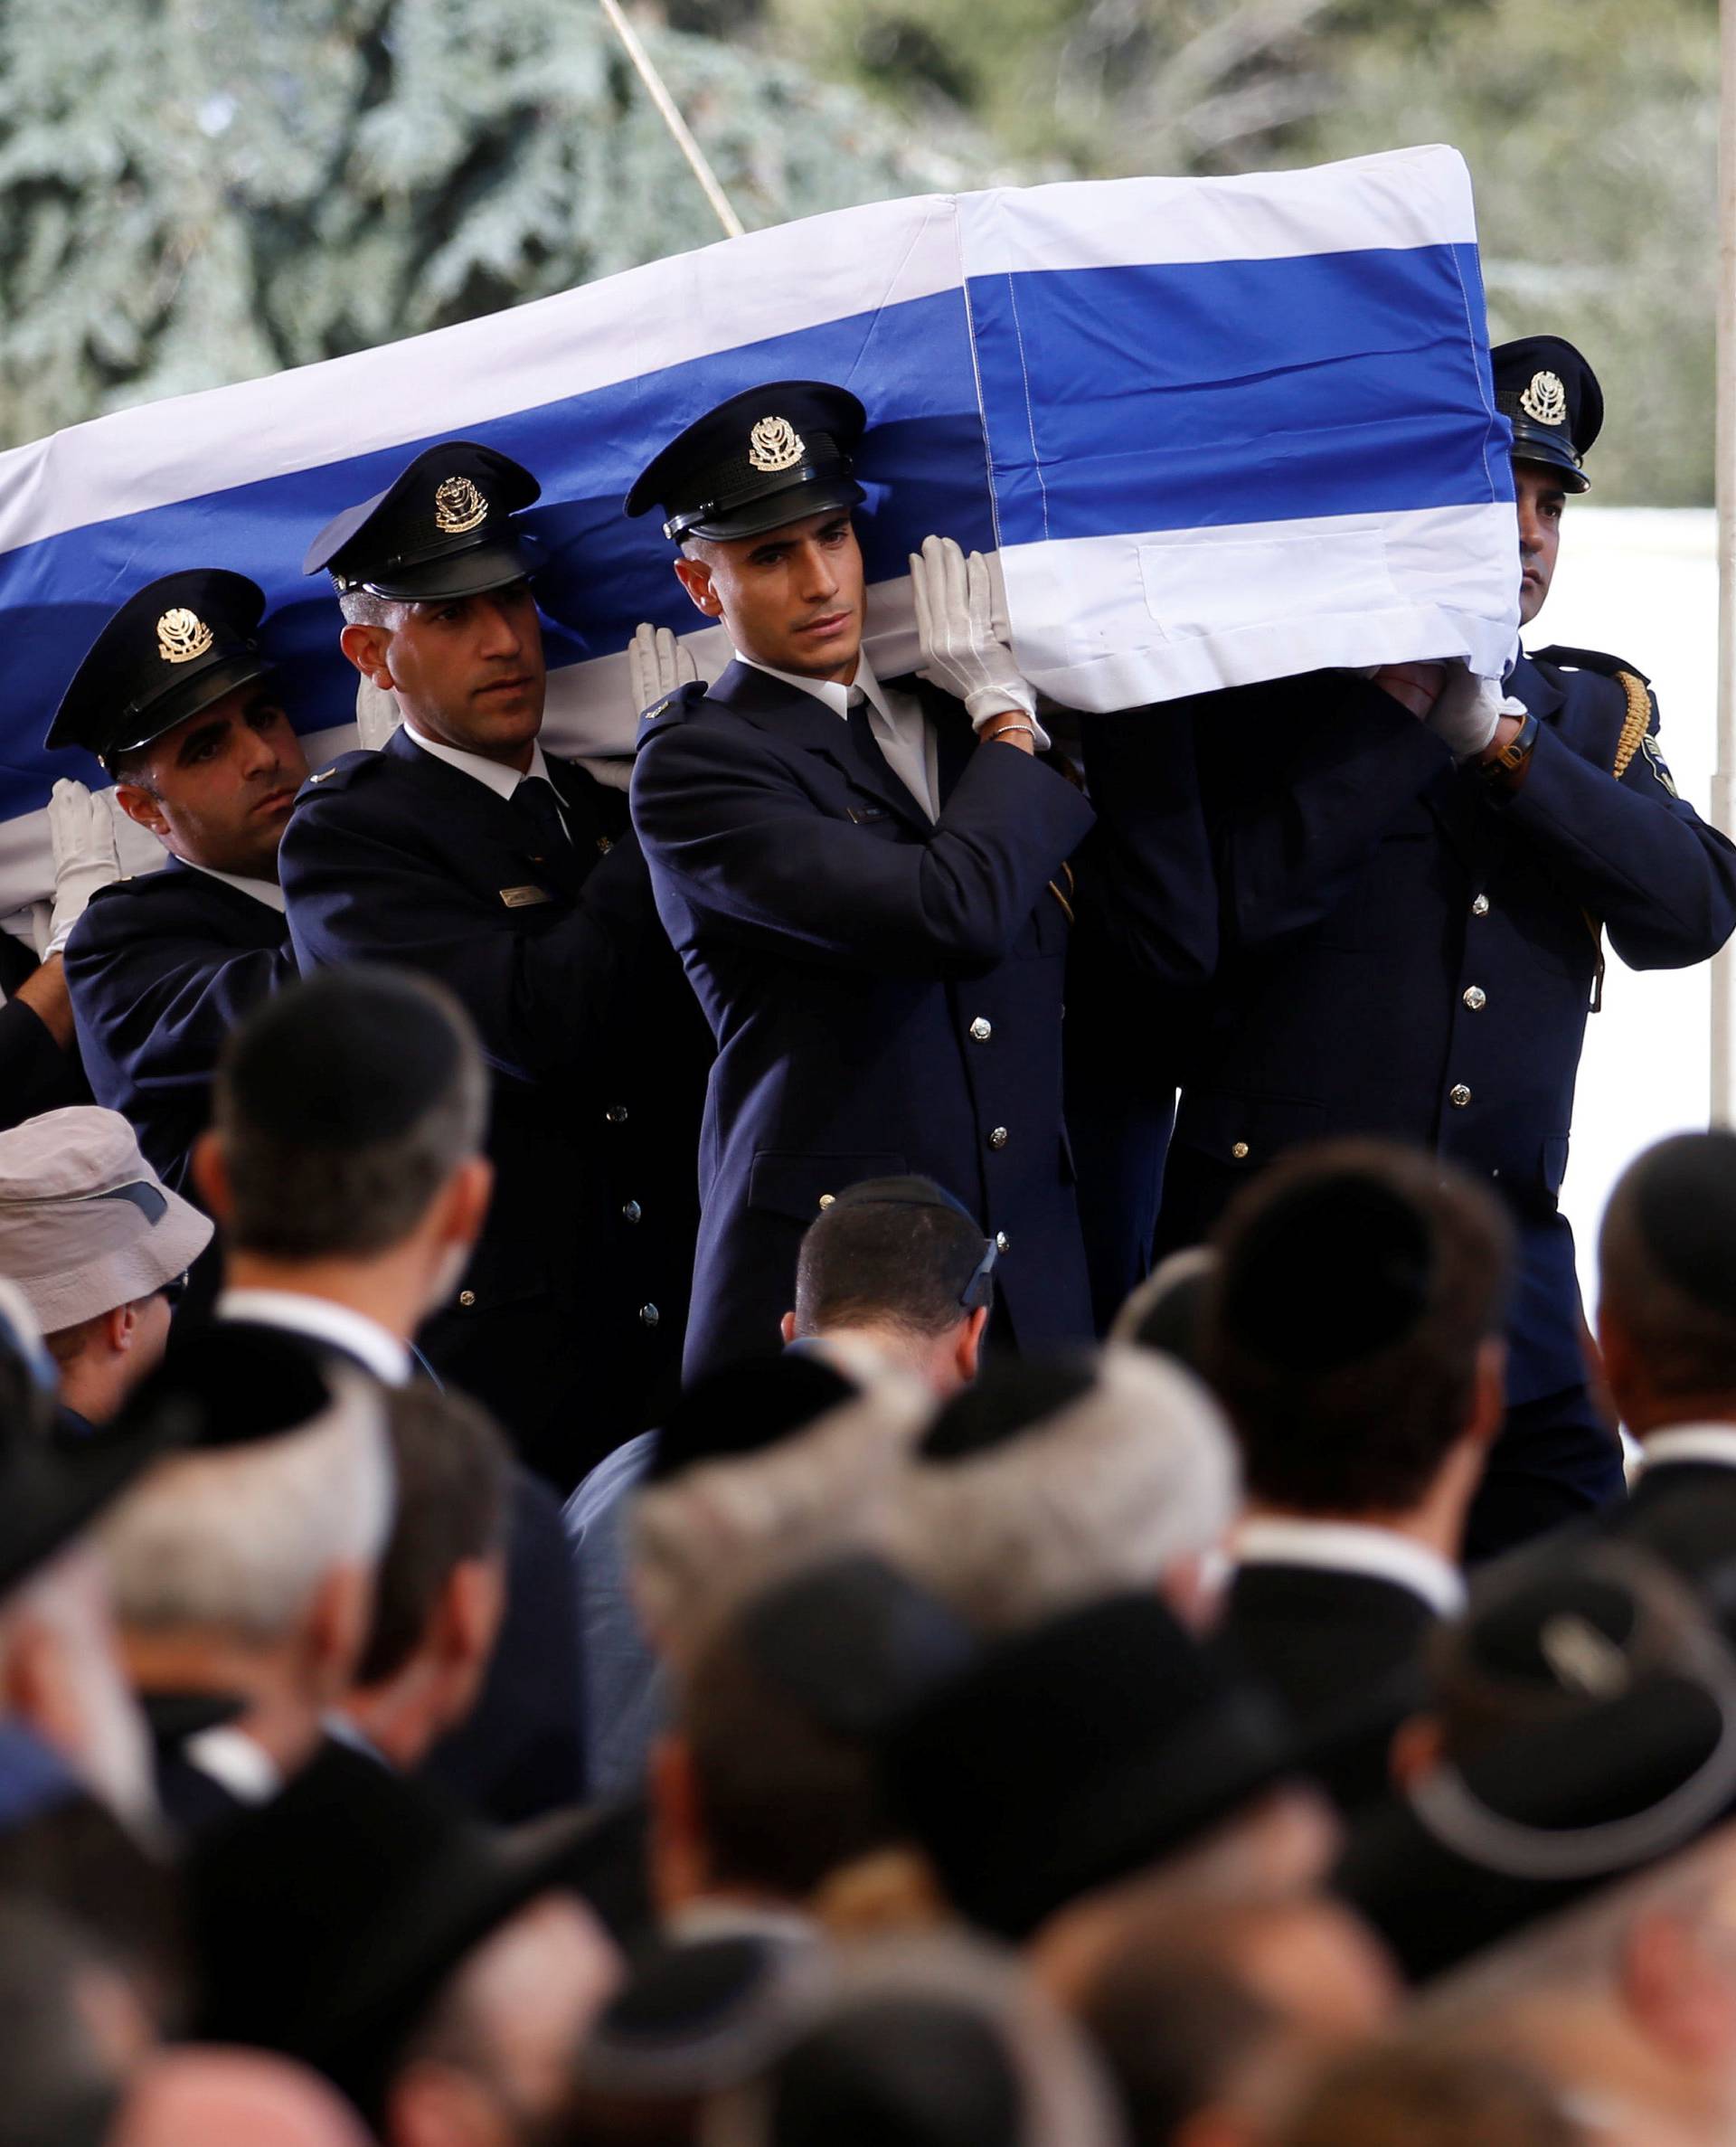 The flag-draped coffin of former Israeli President Shimon Peres is carried by an honour guard at the start of his funeral ceremony at Mount Herzl cemetery in Jerusalem